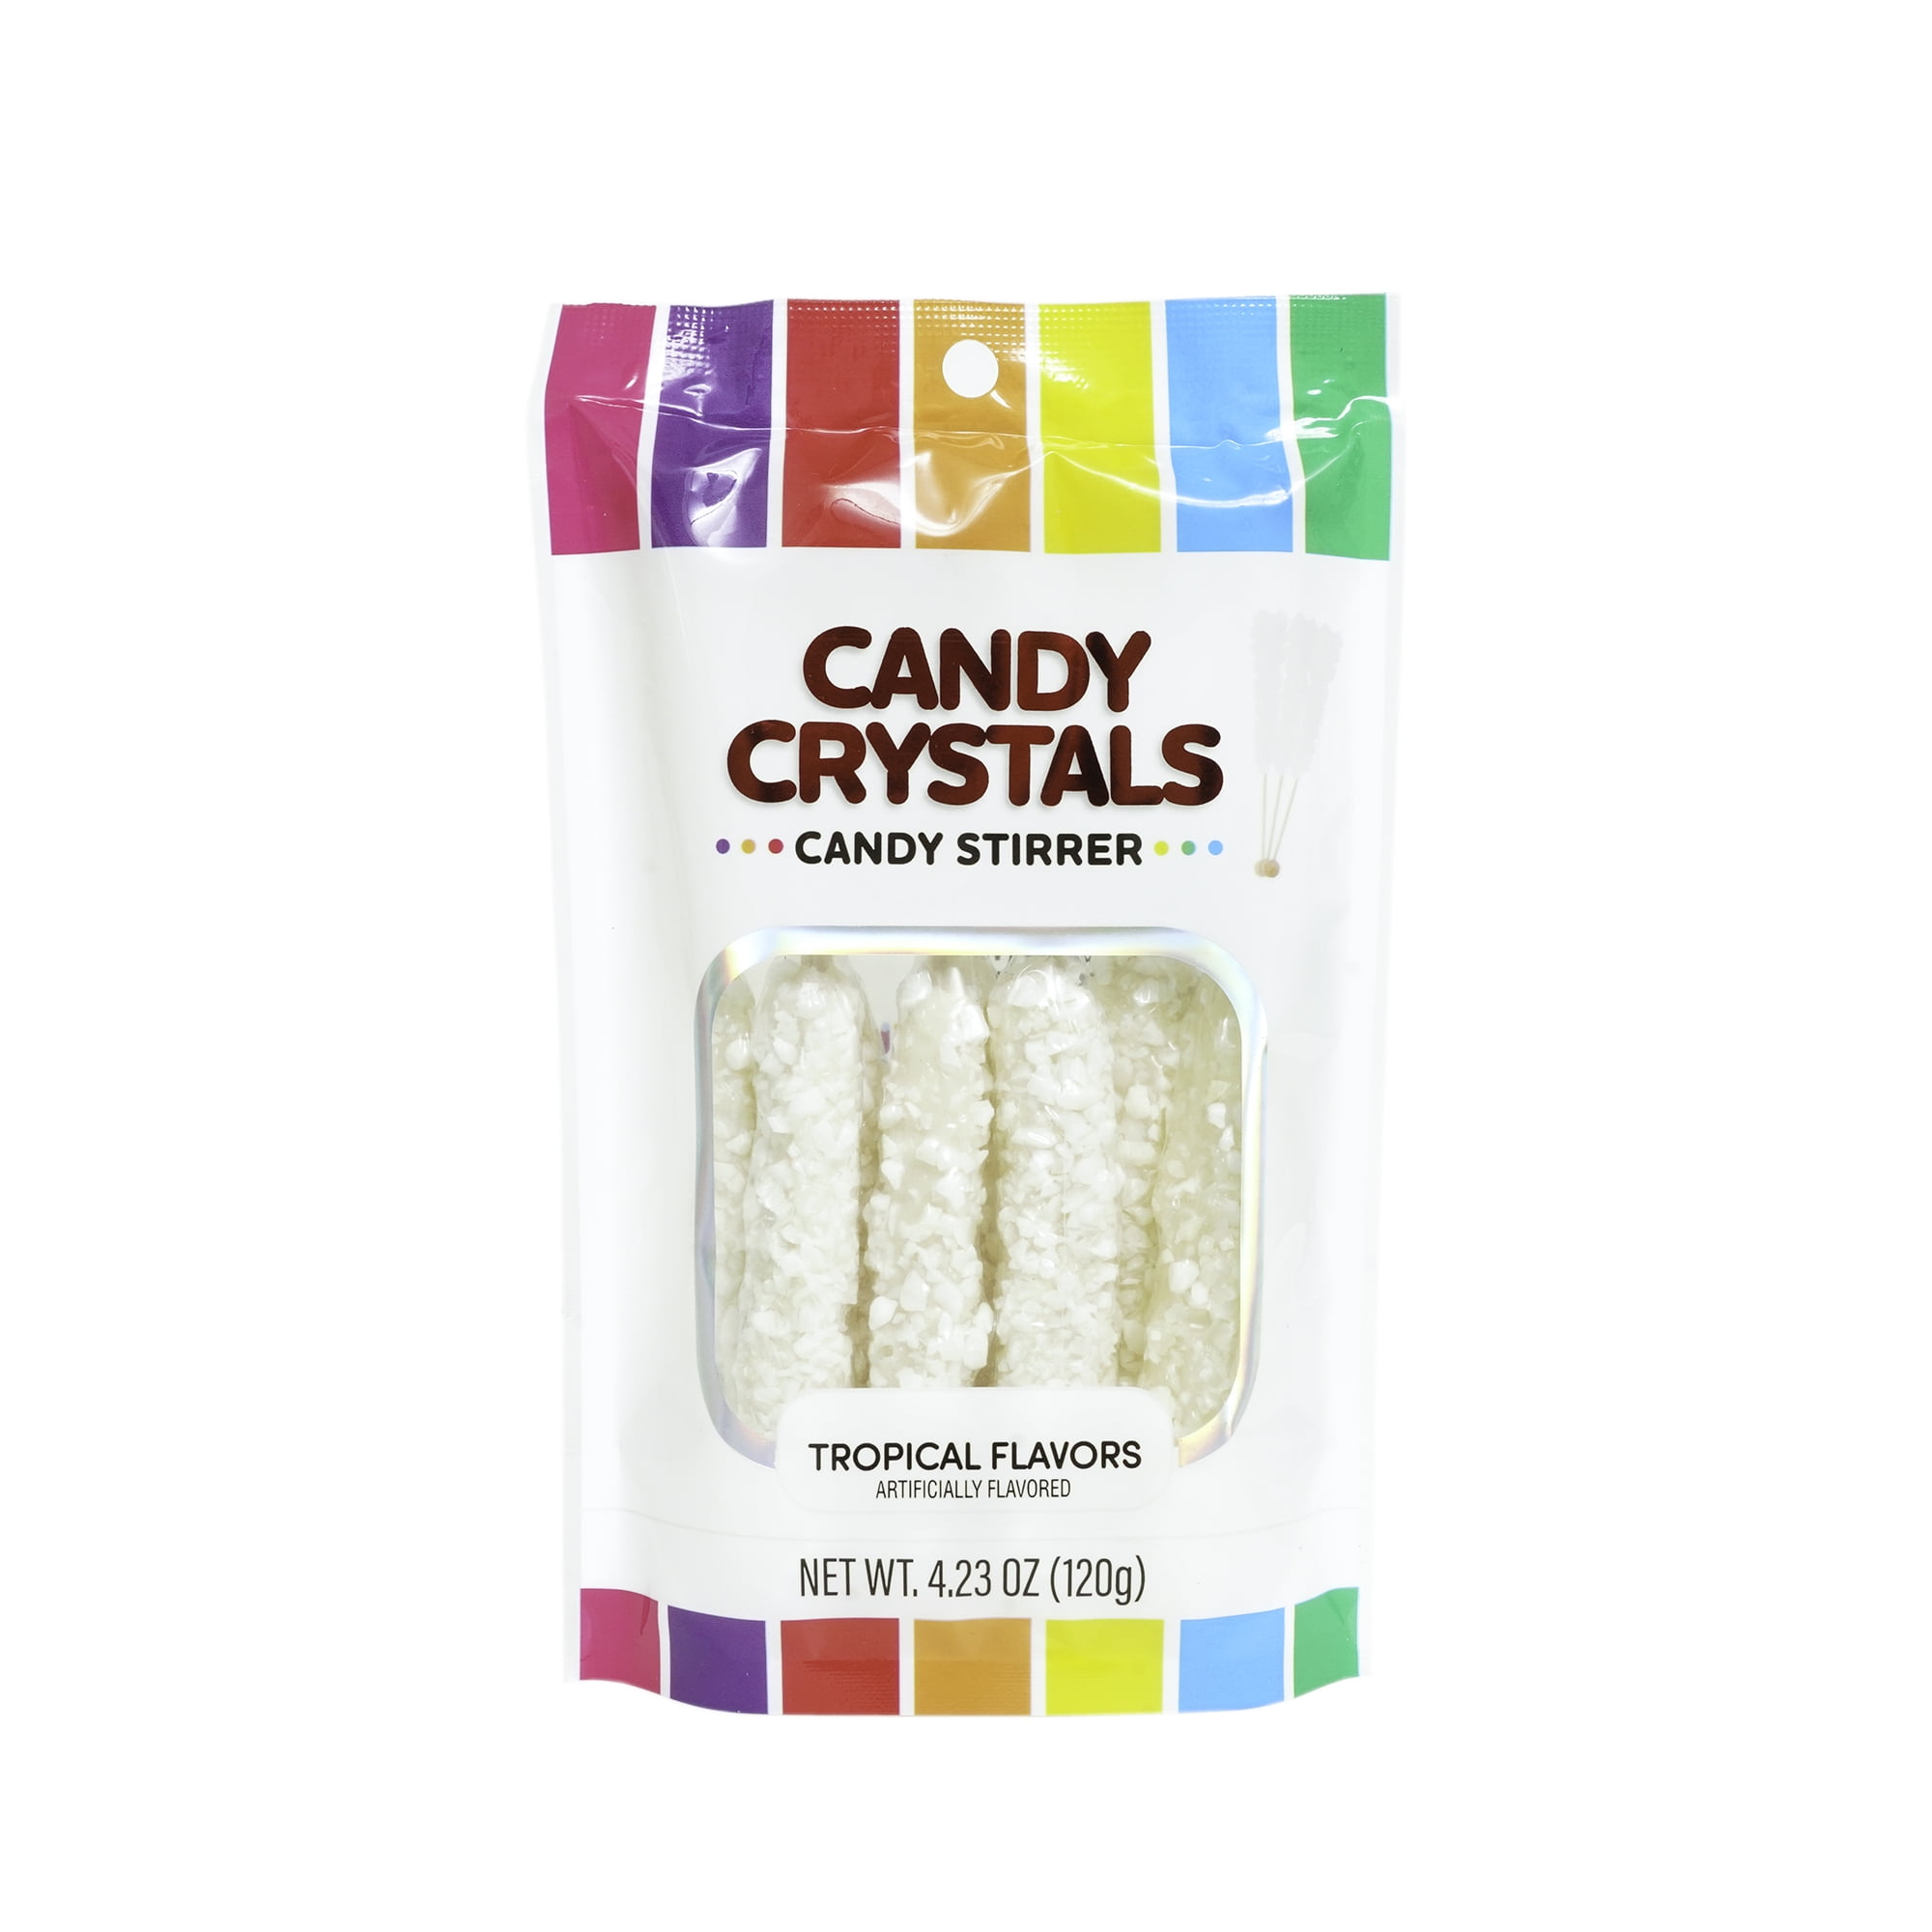 Hilco Tropical Flavored White Candy Stirrers, 4.23 oz, 8 Pack